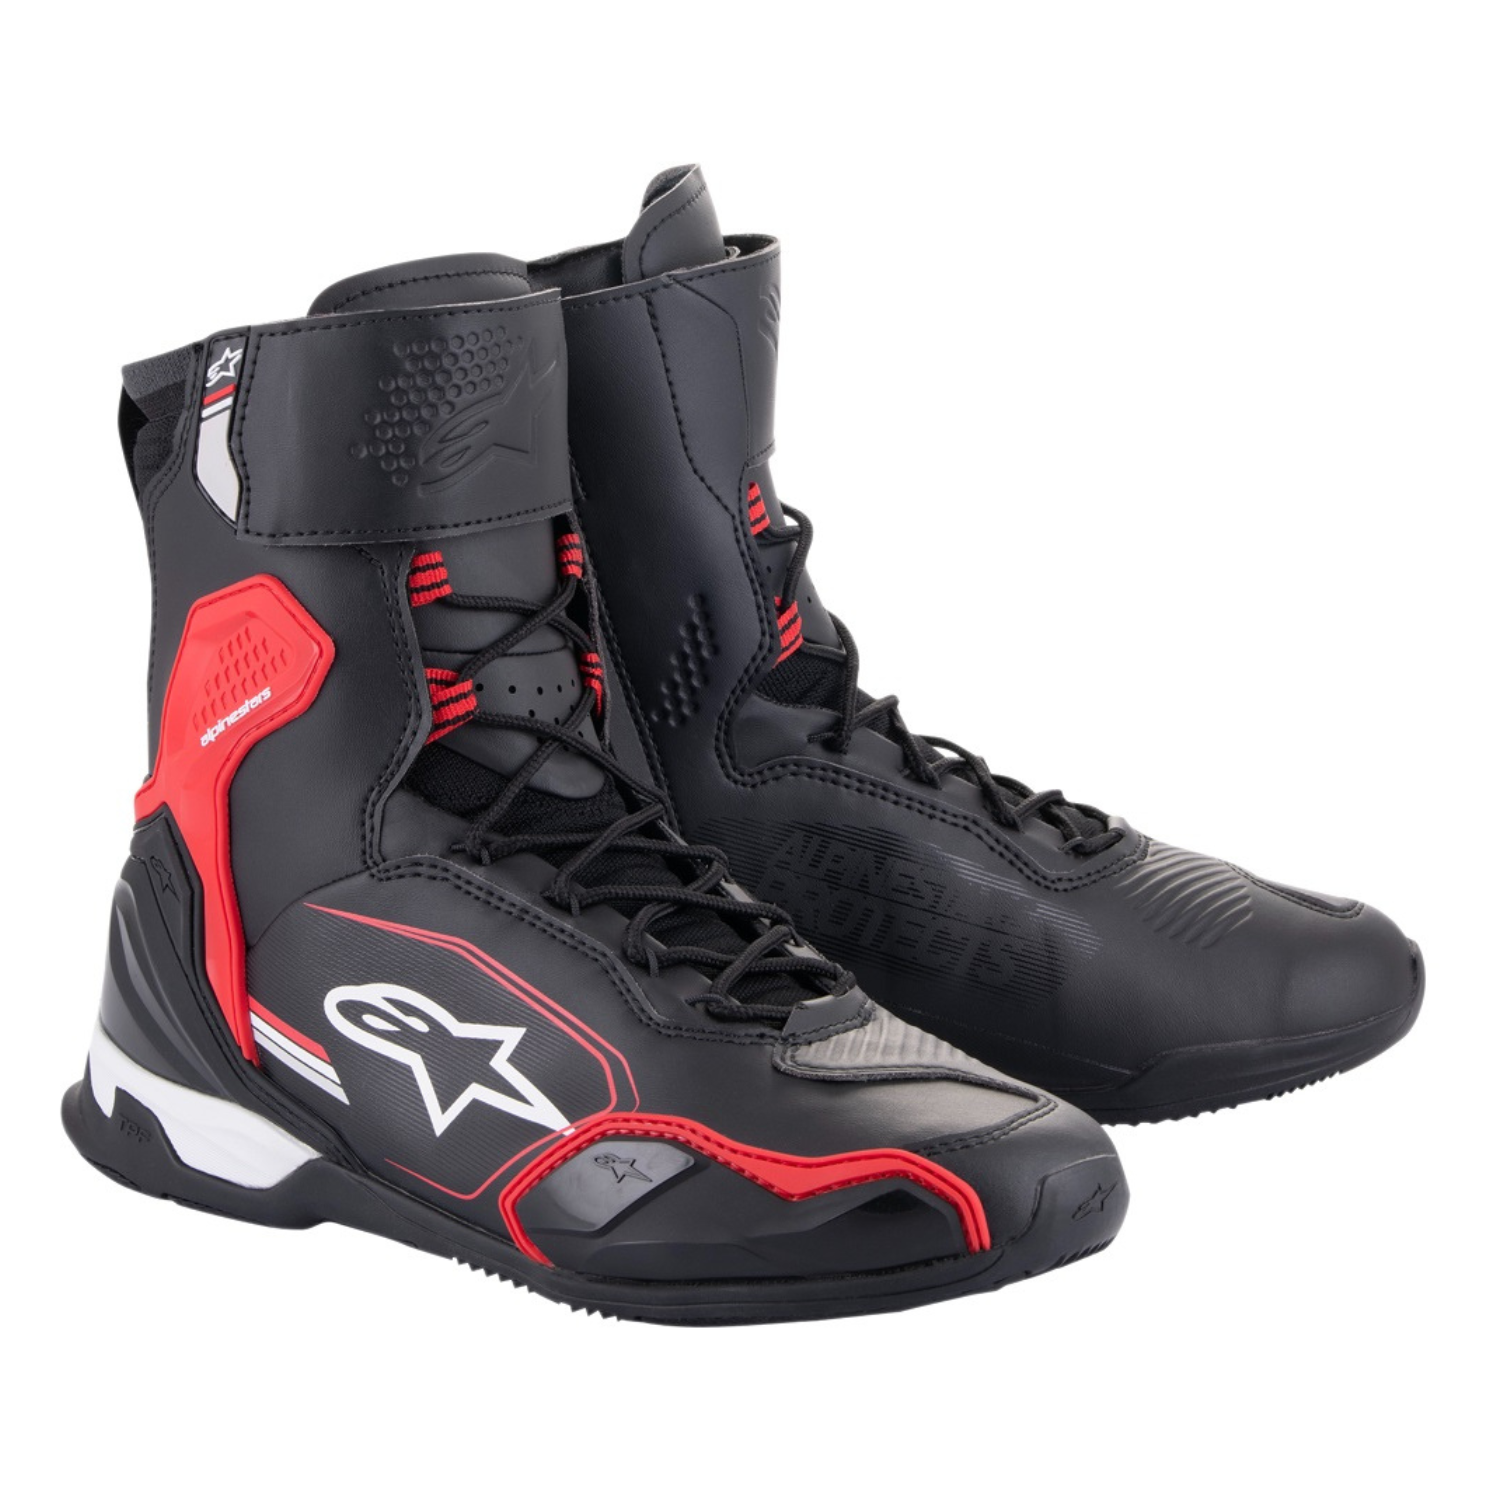 Image of Alpinestars Superfaster Shoes Black Bright Red White Taille US 6